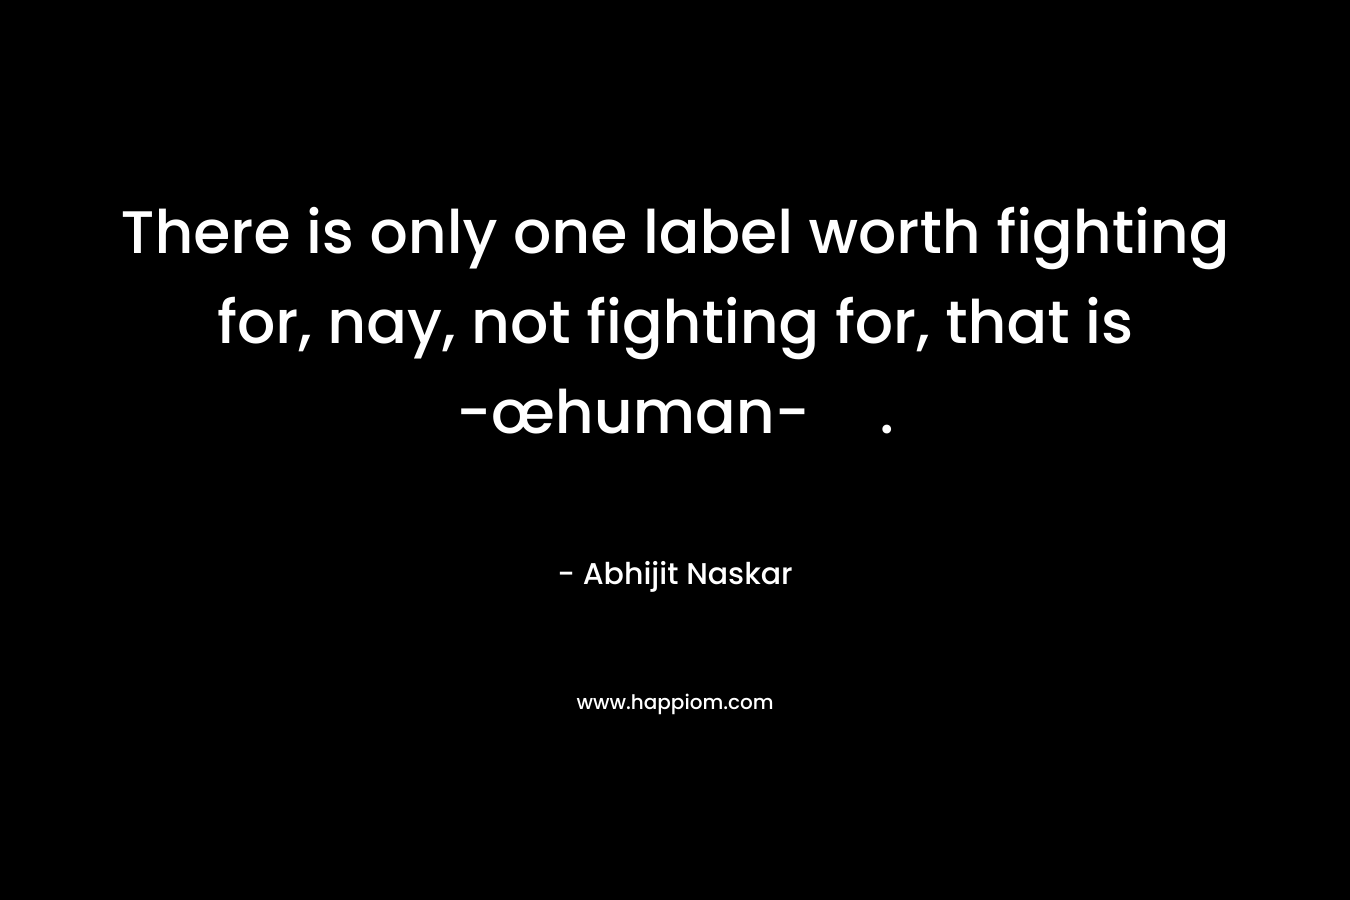 There is only one label worth fighting for, nay, not fighting for, that is -œhuman-.